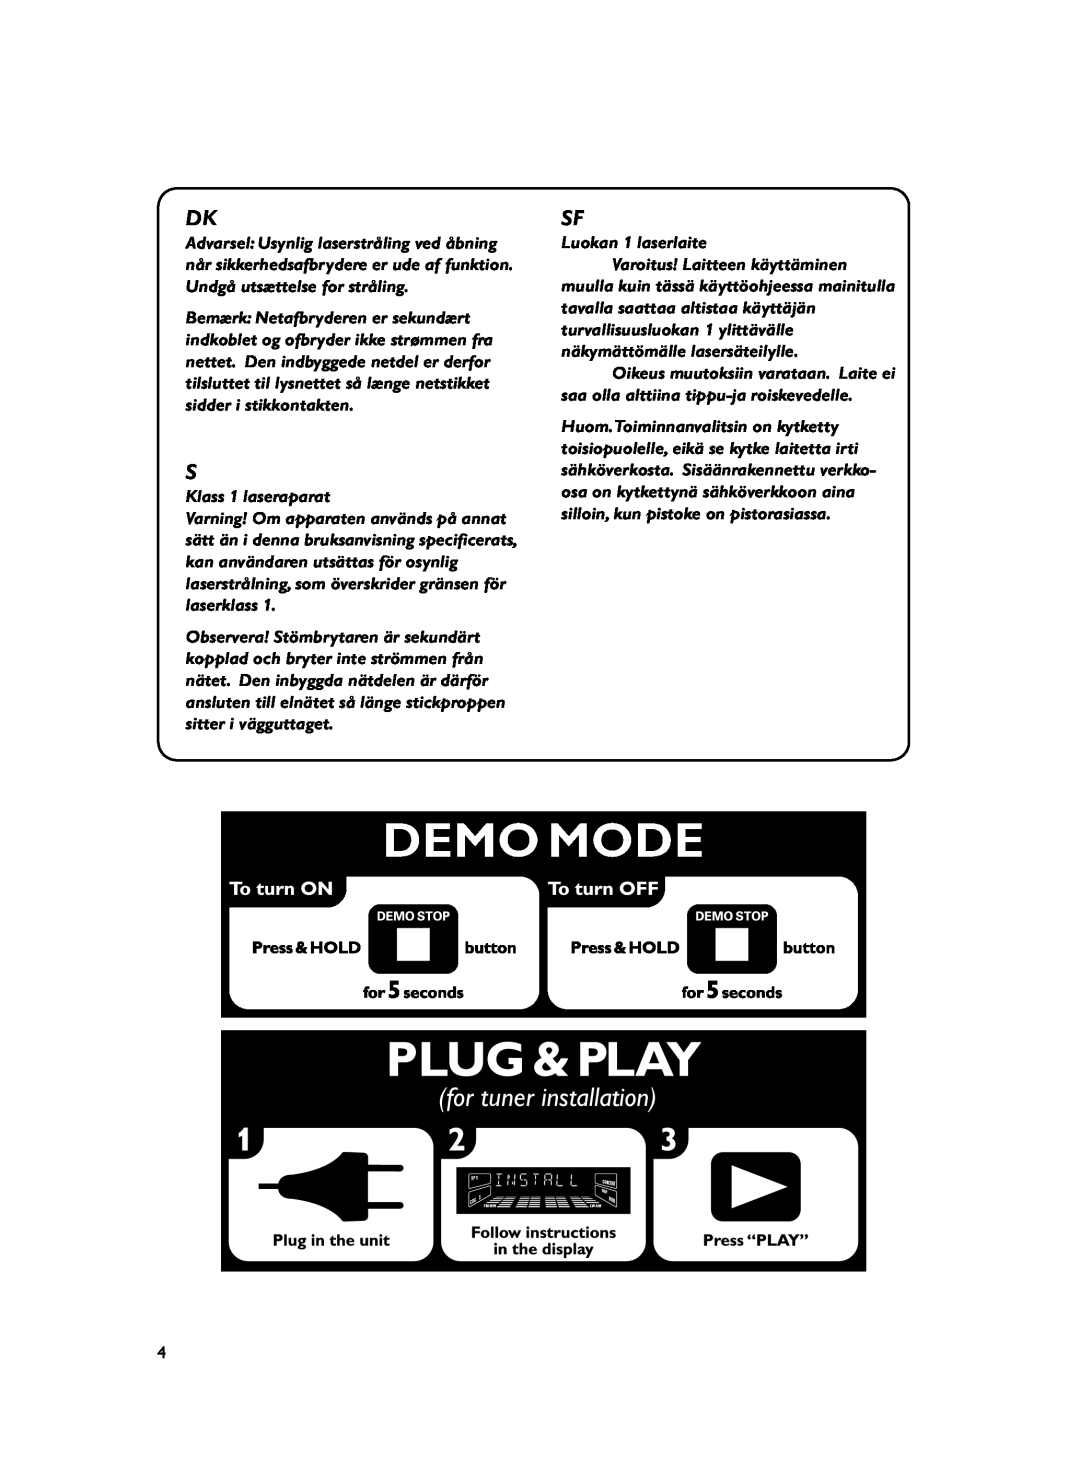 Philips FWM399 manual for tuner installation 